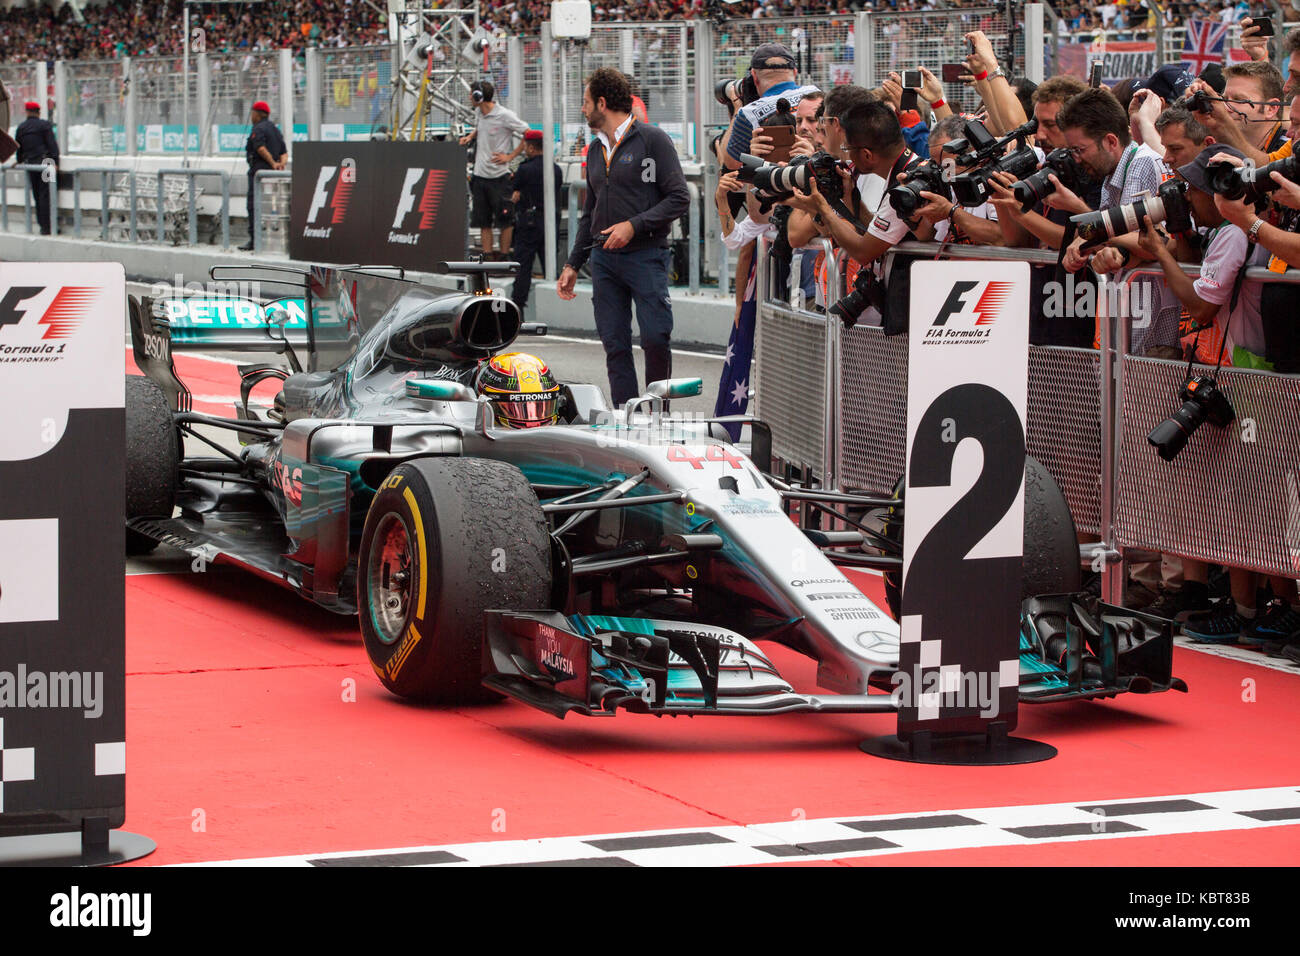 Lewis Hamilton from Mercedes parks in front of the podium at the end the F1 Grand Prix at the Sepang F1 circuit. Hamilton finished the race in second. On October 01, 2017 in Kuala Lumpur, Malaysia. Stock Photo